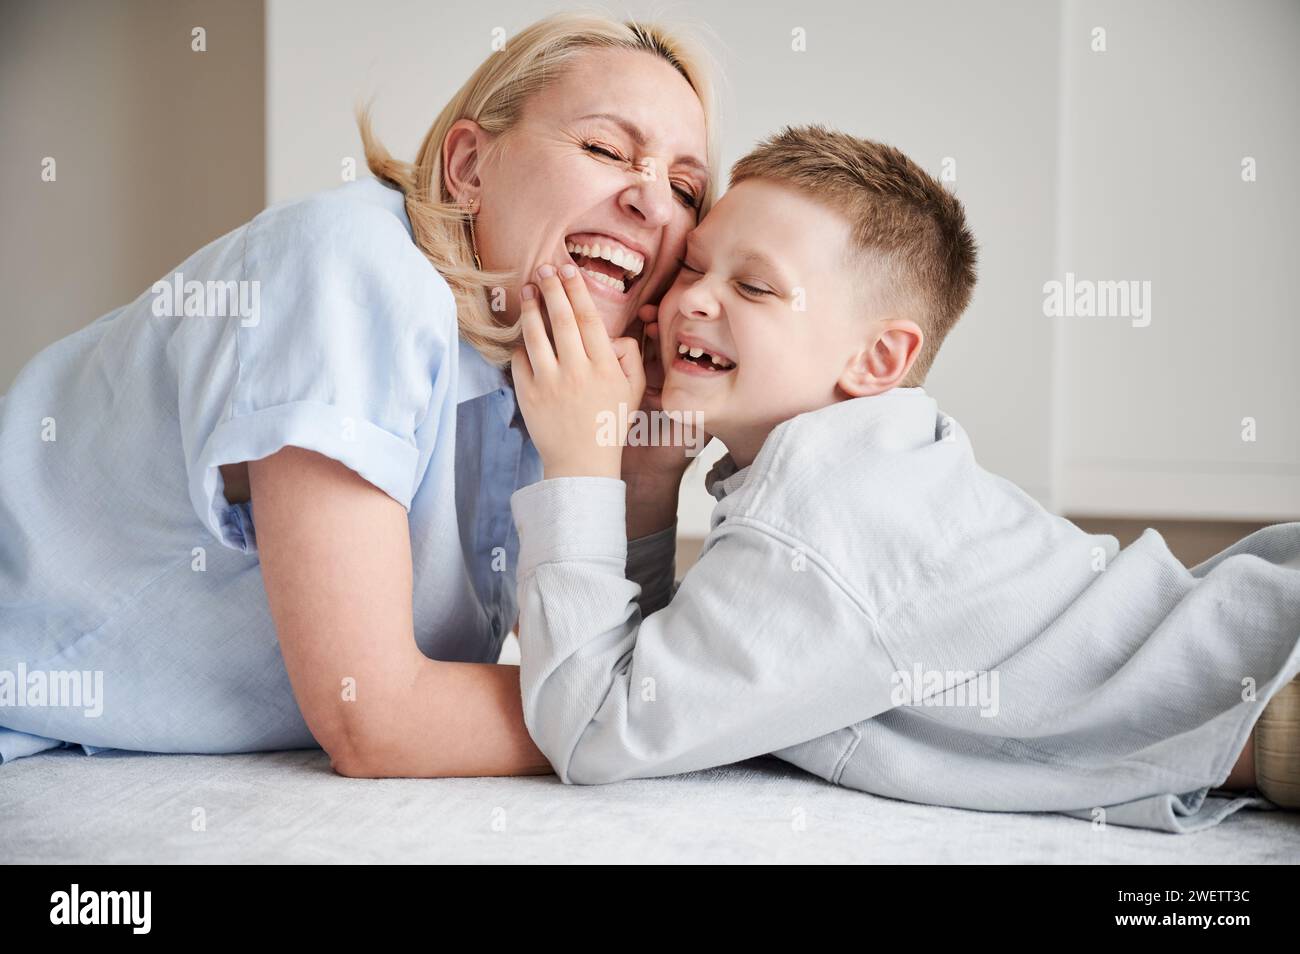 Joyful mom laughing with her son. Lovely moment of young mother and her kid smiling at home. Happy child having fun with his parent. Stock Photo